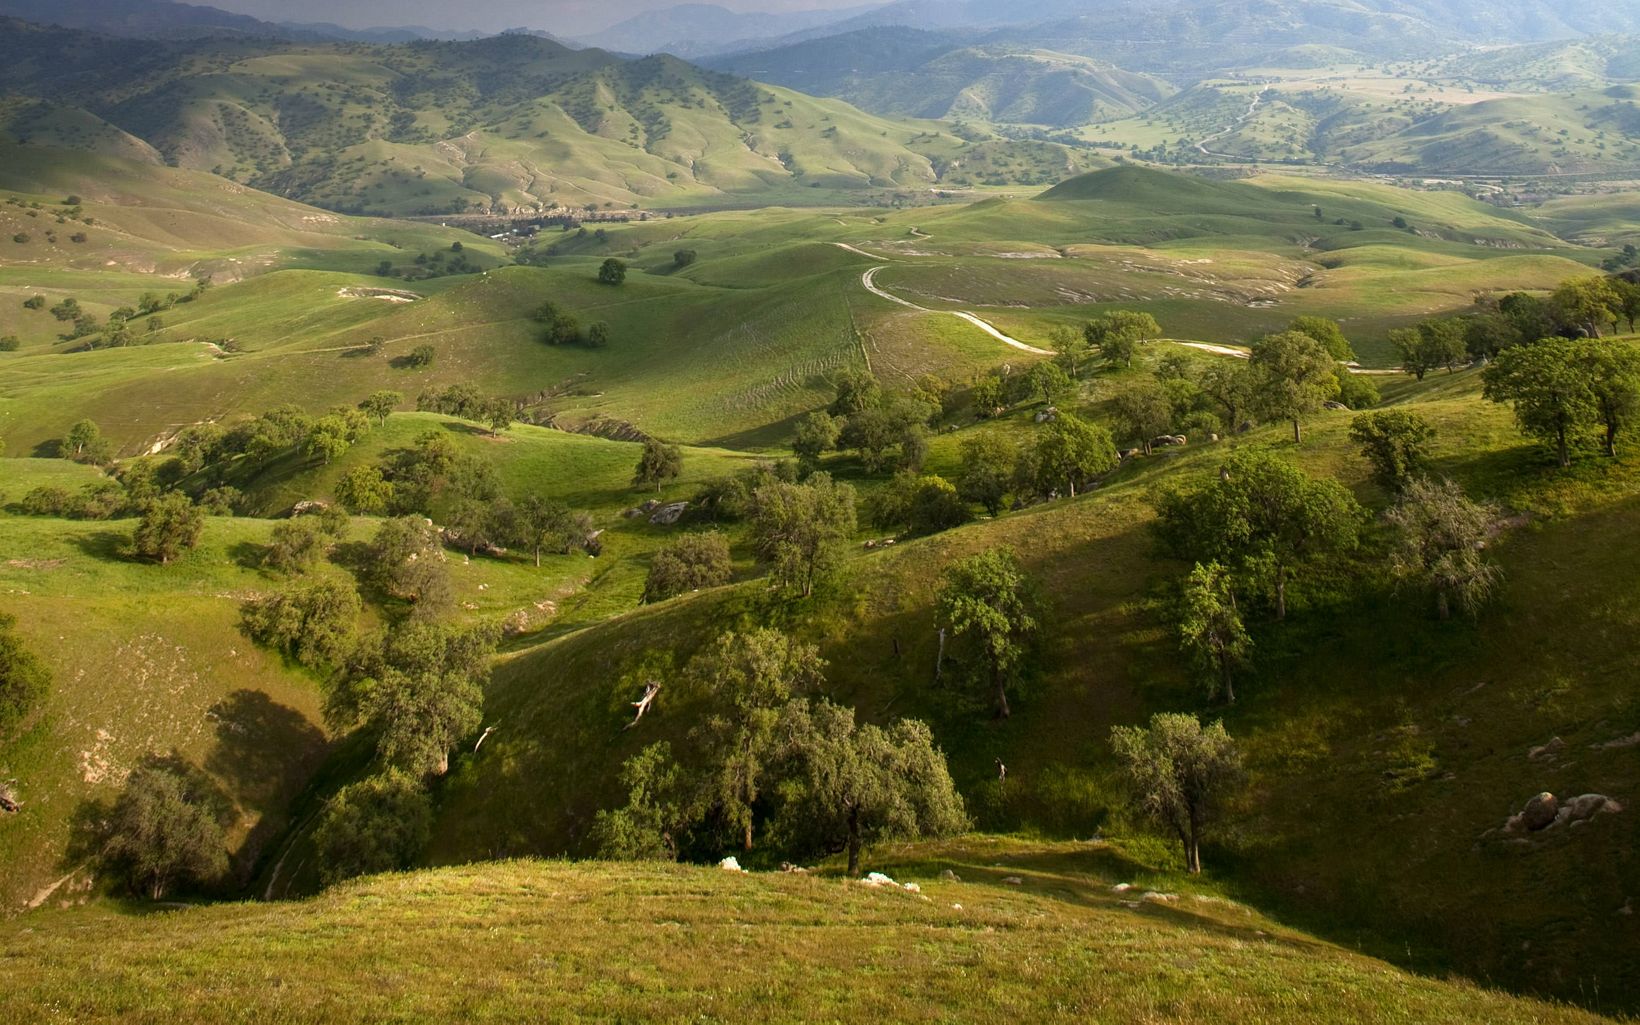 Scenic views of the rolling green hills and oak trees of the Tollhouse Ranch located in the heart of the Tehachapi corridor, California.